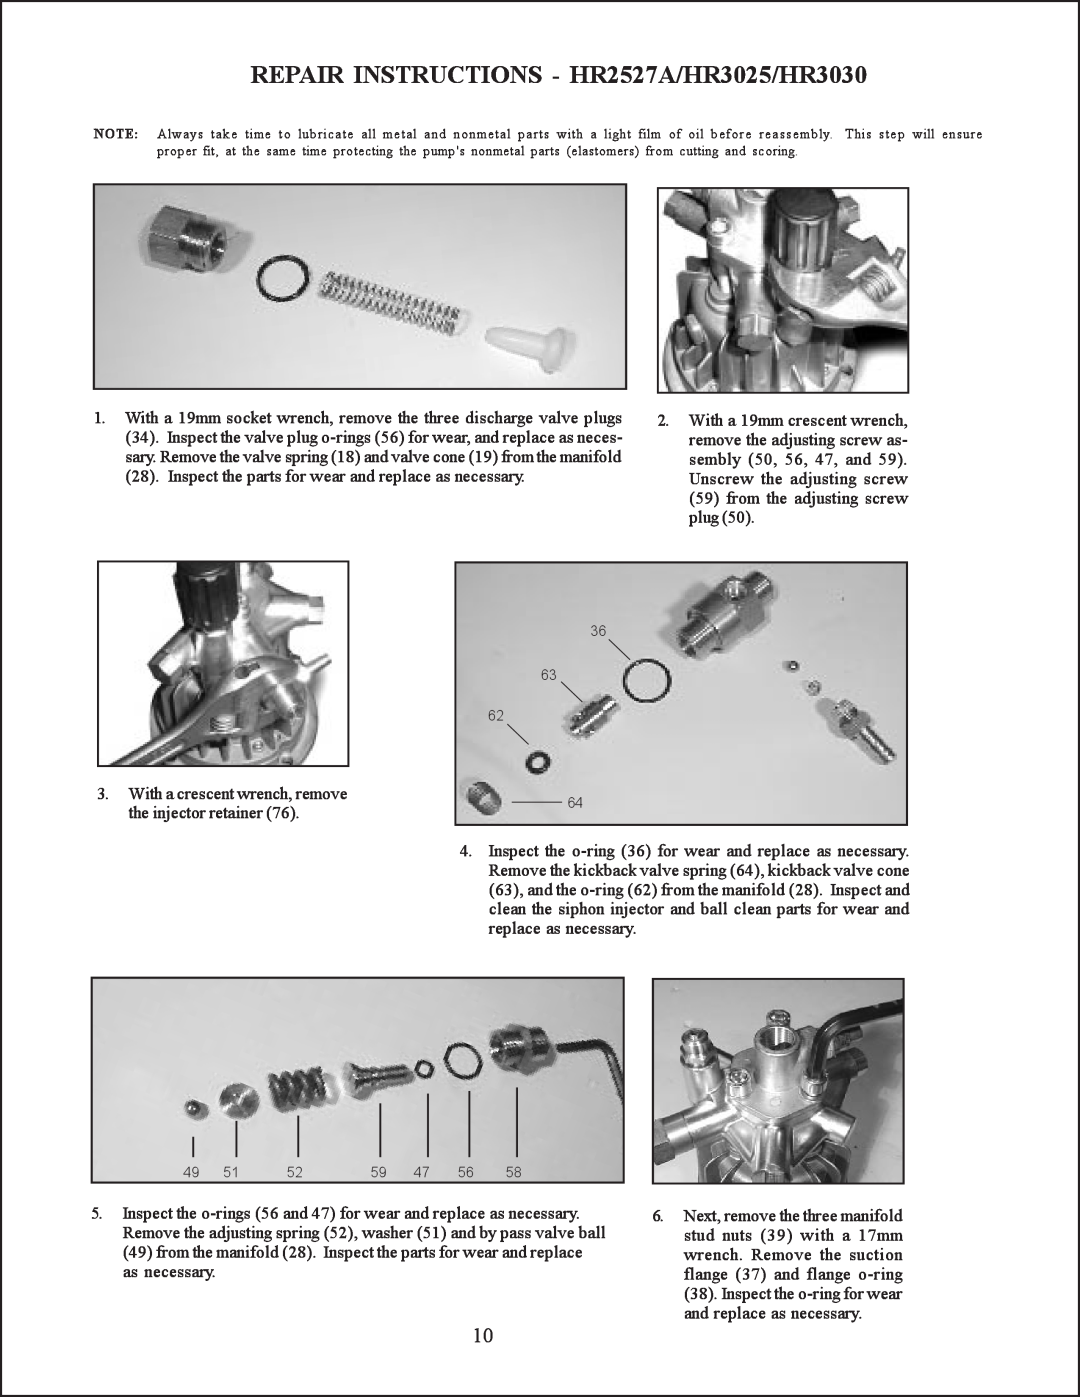 Giant operating instructions REPAIR INSTRUCTIONS - HR2527A/HR3025/HR3030, from the adjusting screw plug, as necessary 